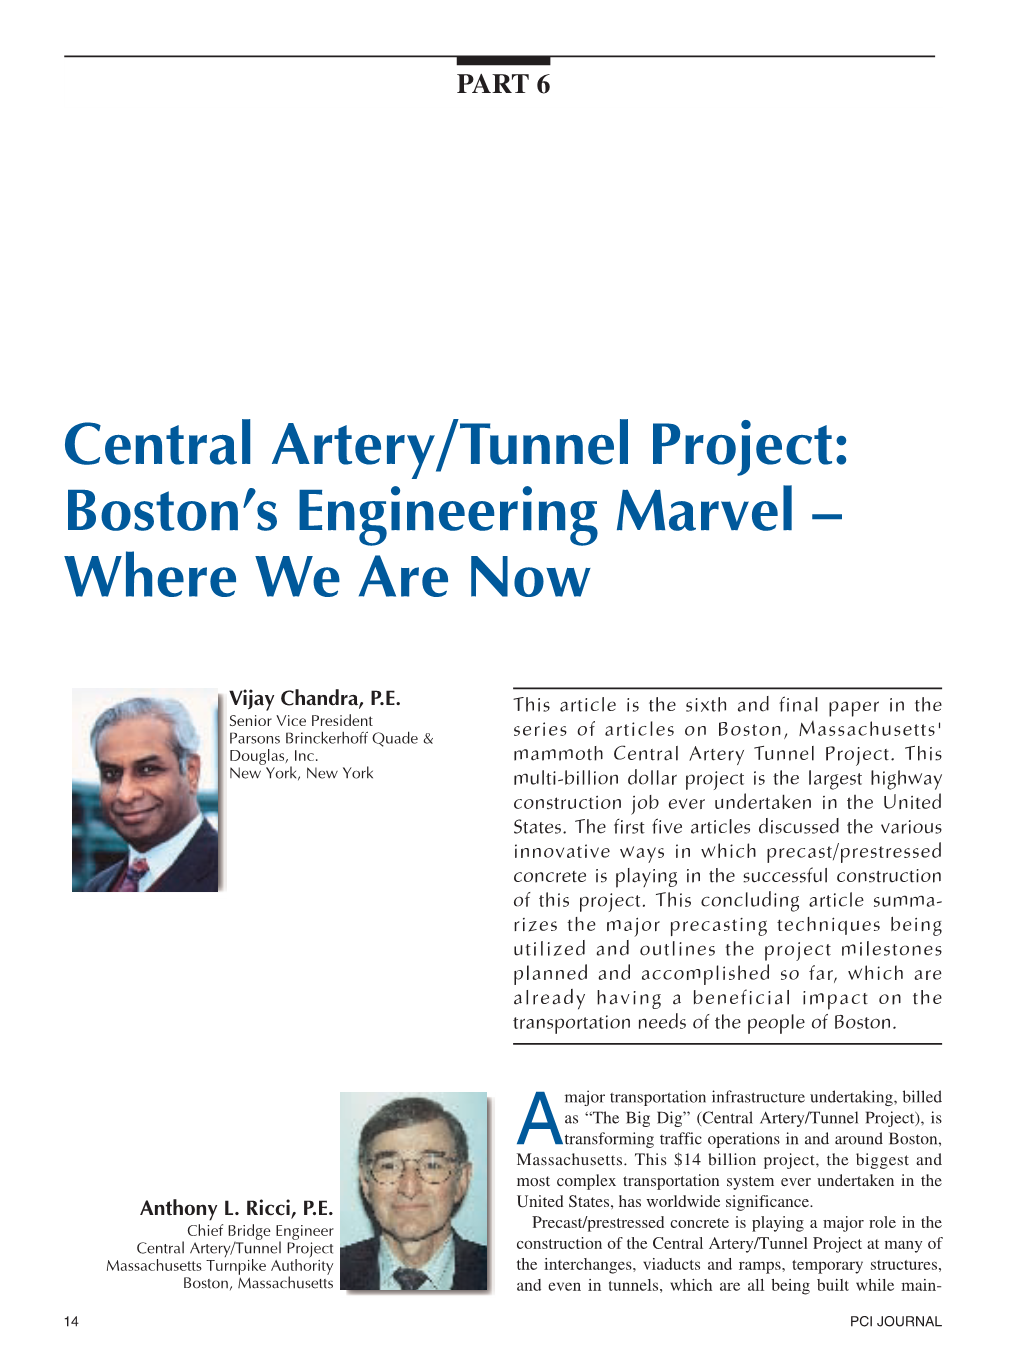 Central Artery/Tunnel Project: Boston's Engineering Marvel